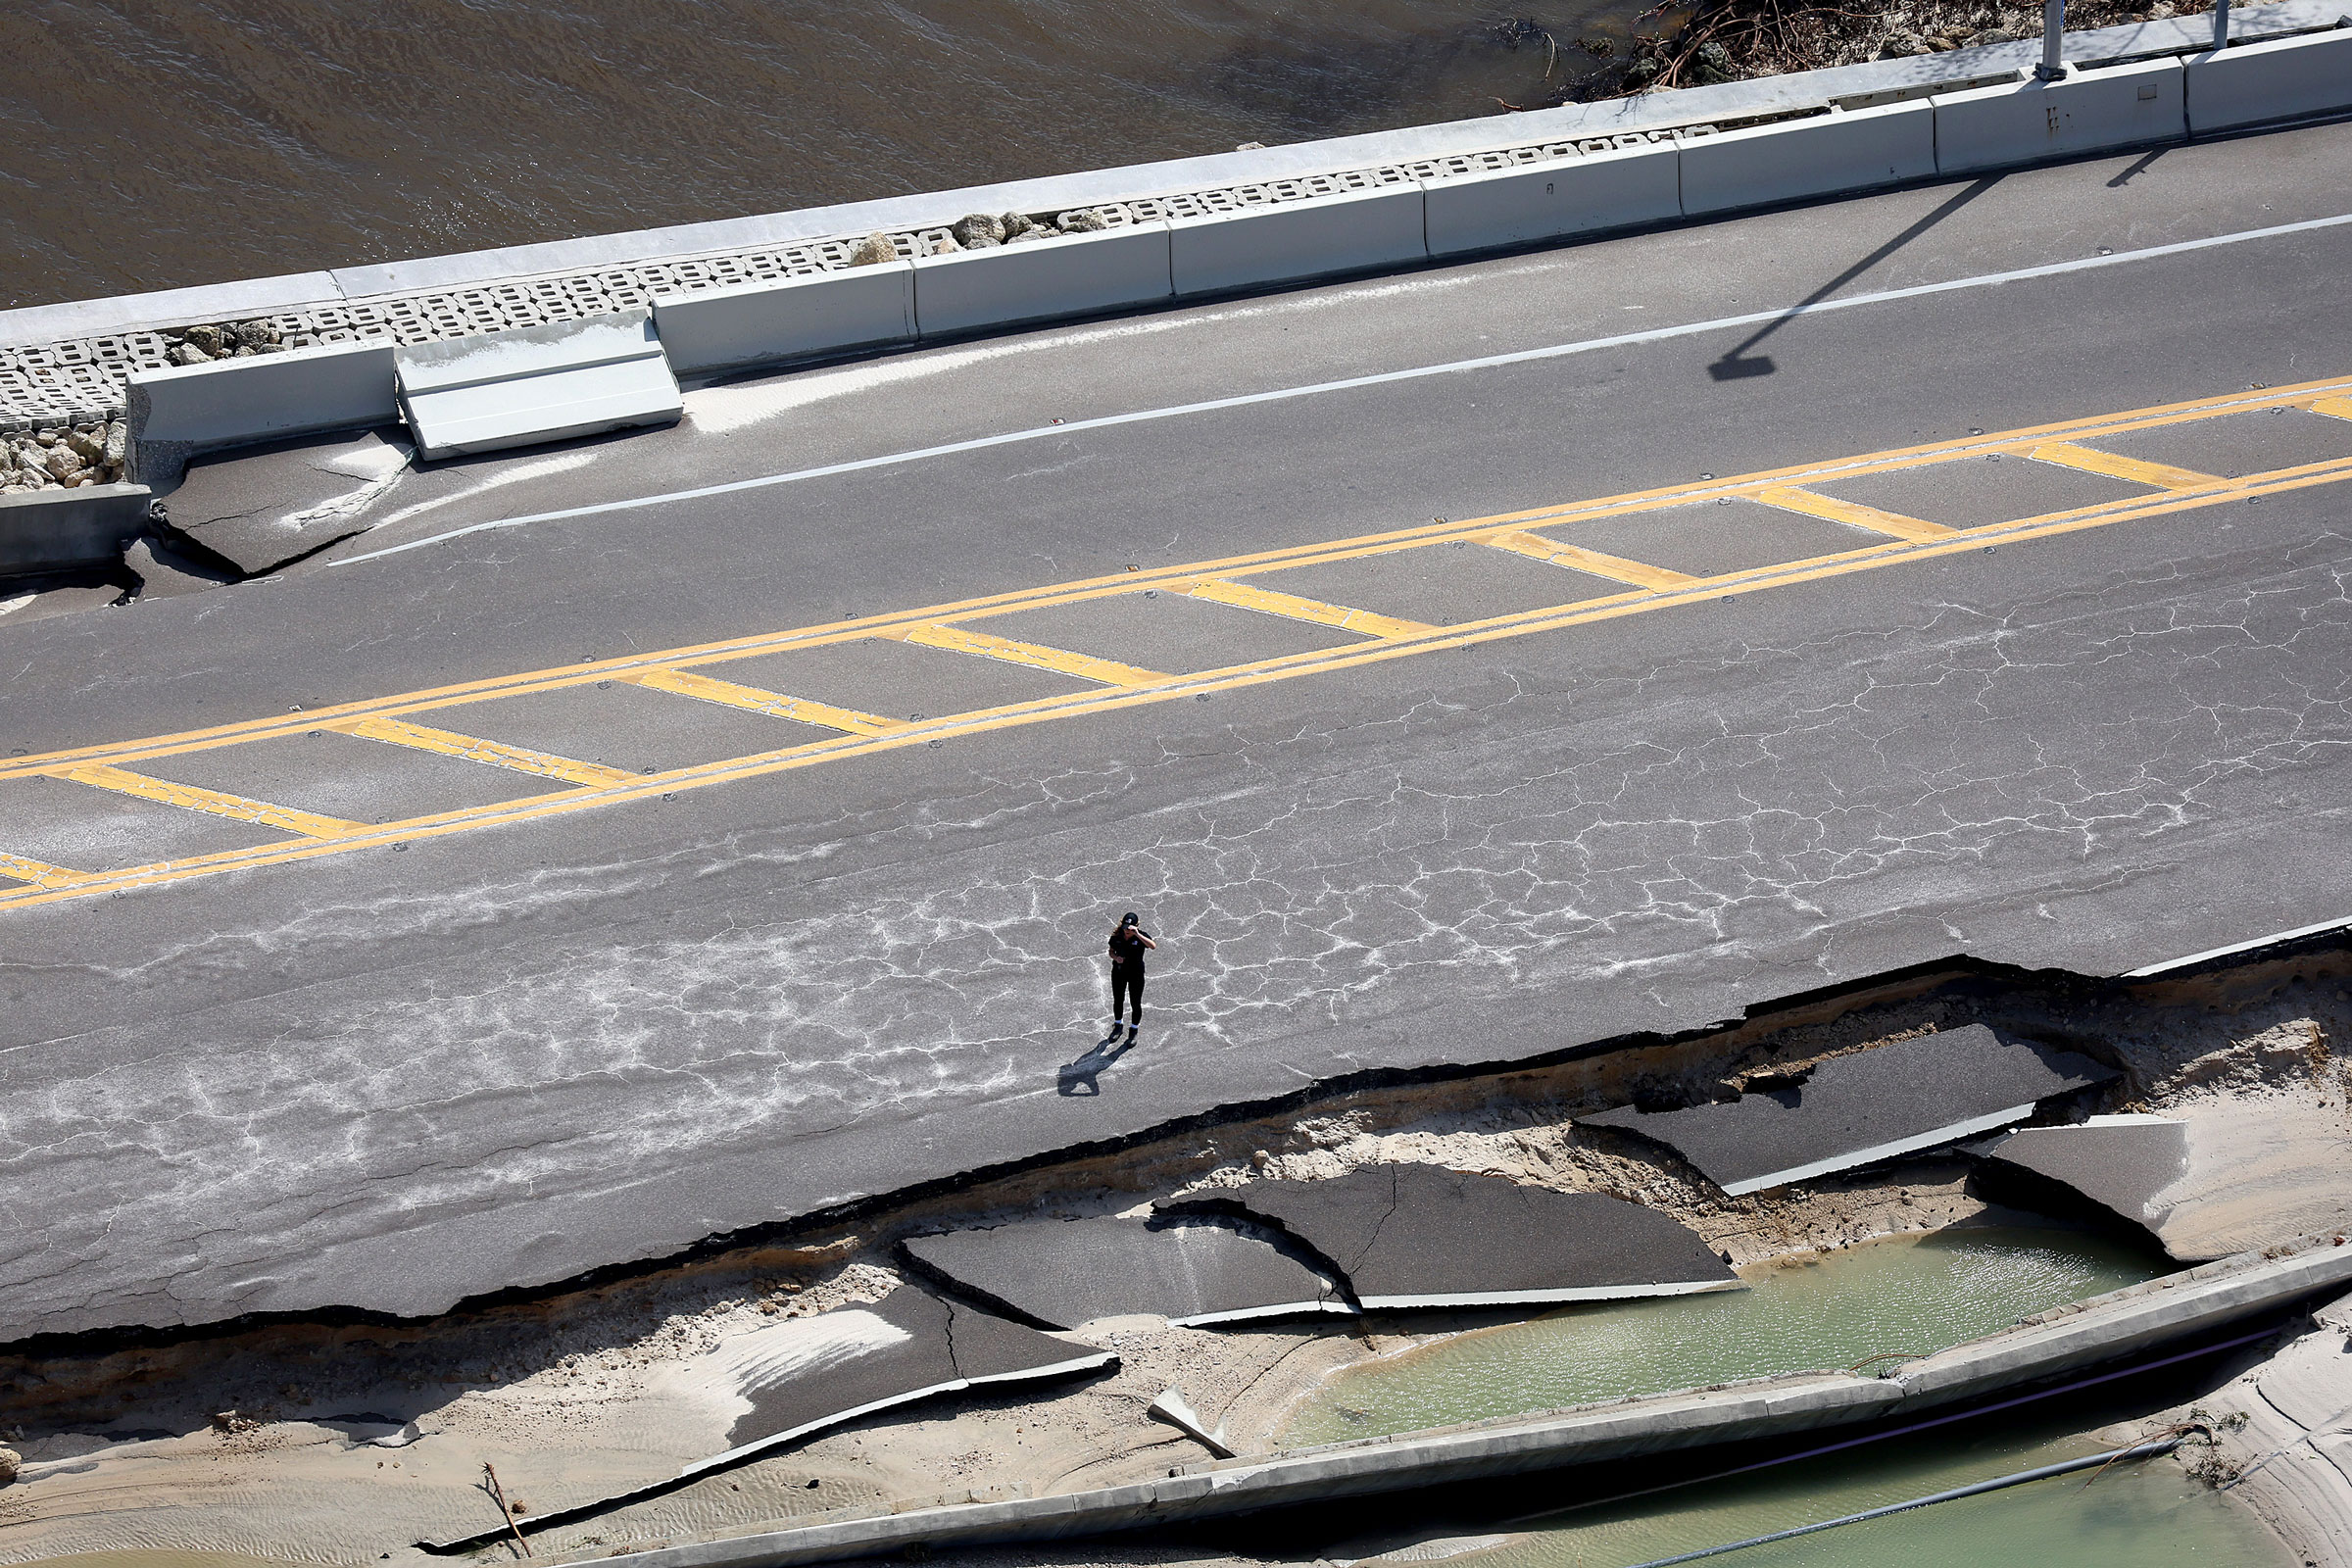 Parts of Sanibel Causeway are washed away along with sections of the bridge after Hurricane Ian passed through the area on Sept. 29 in Sanibel, Fla. (Joe Raedle—Getty Images)